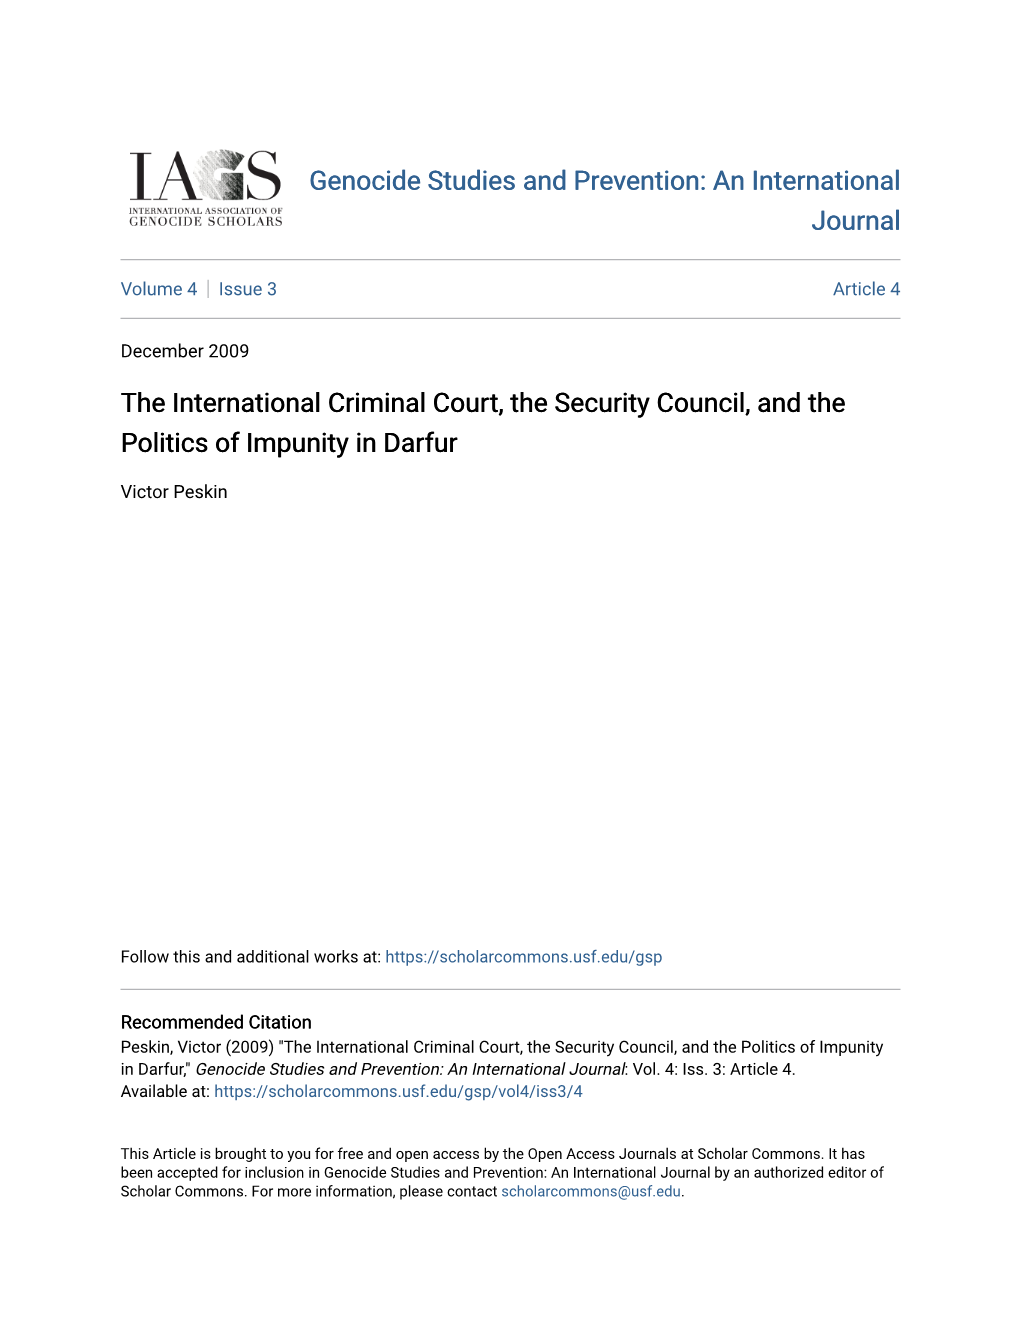 The International Criminal Court, the Security Council, and the Politics of Impunity in Darfur